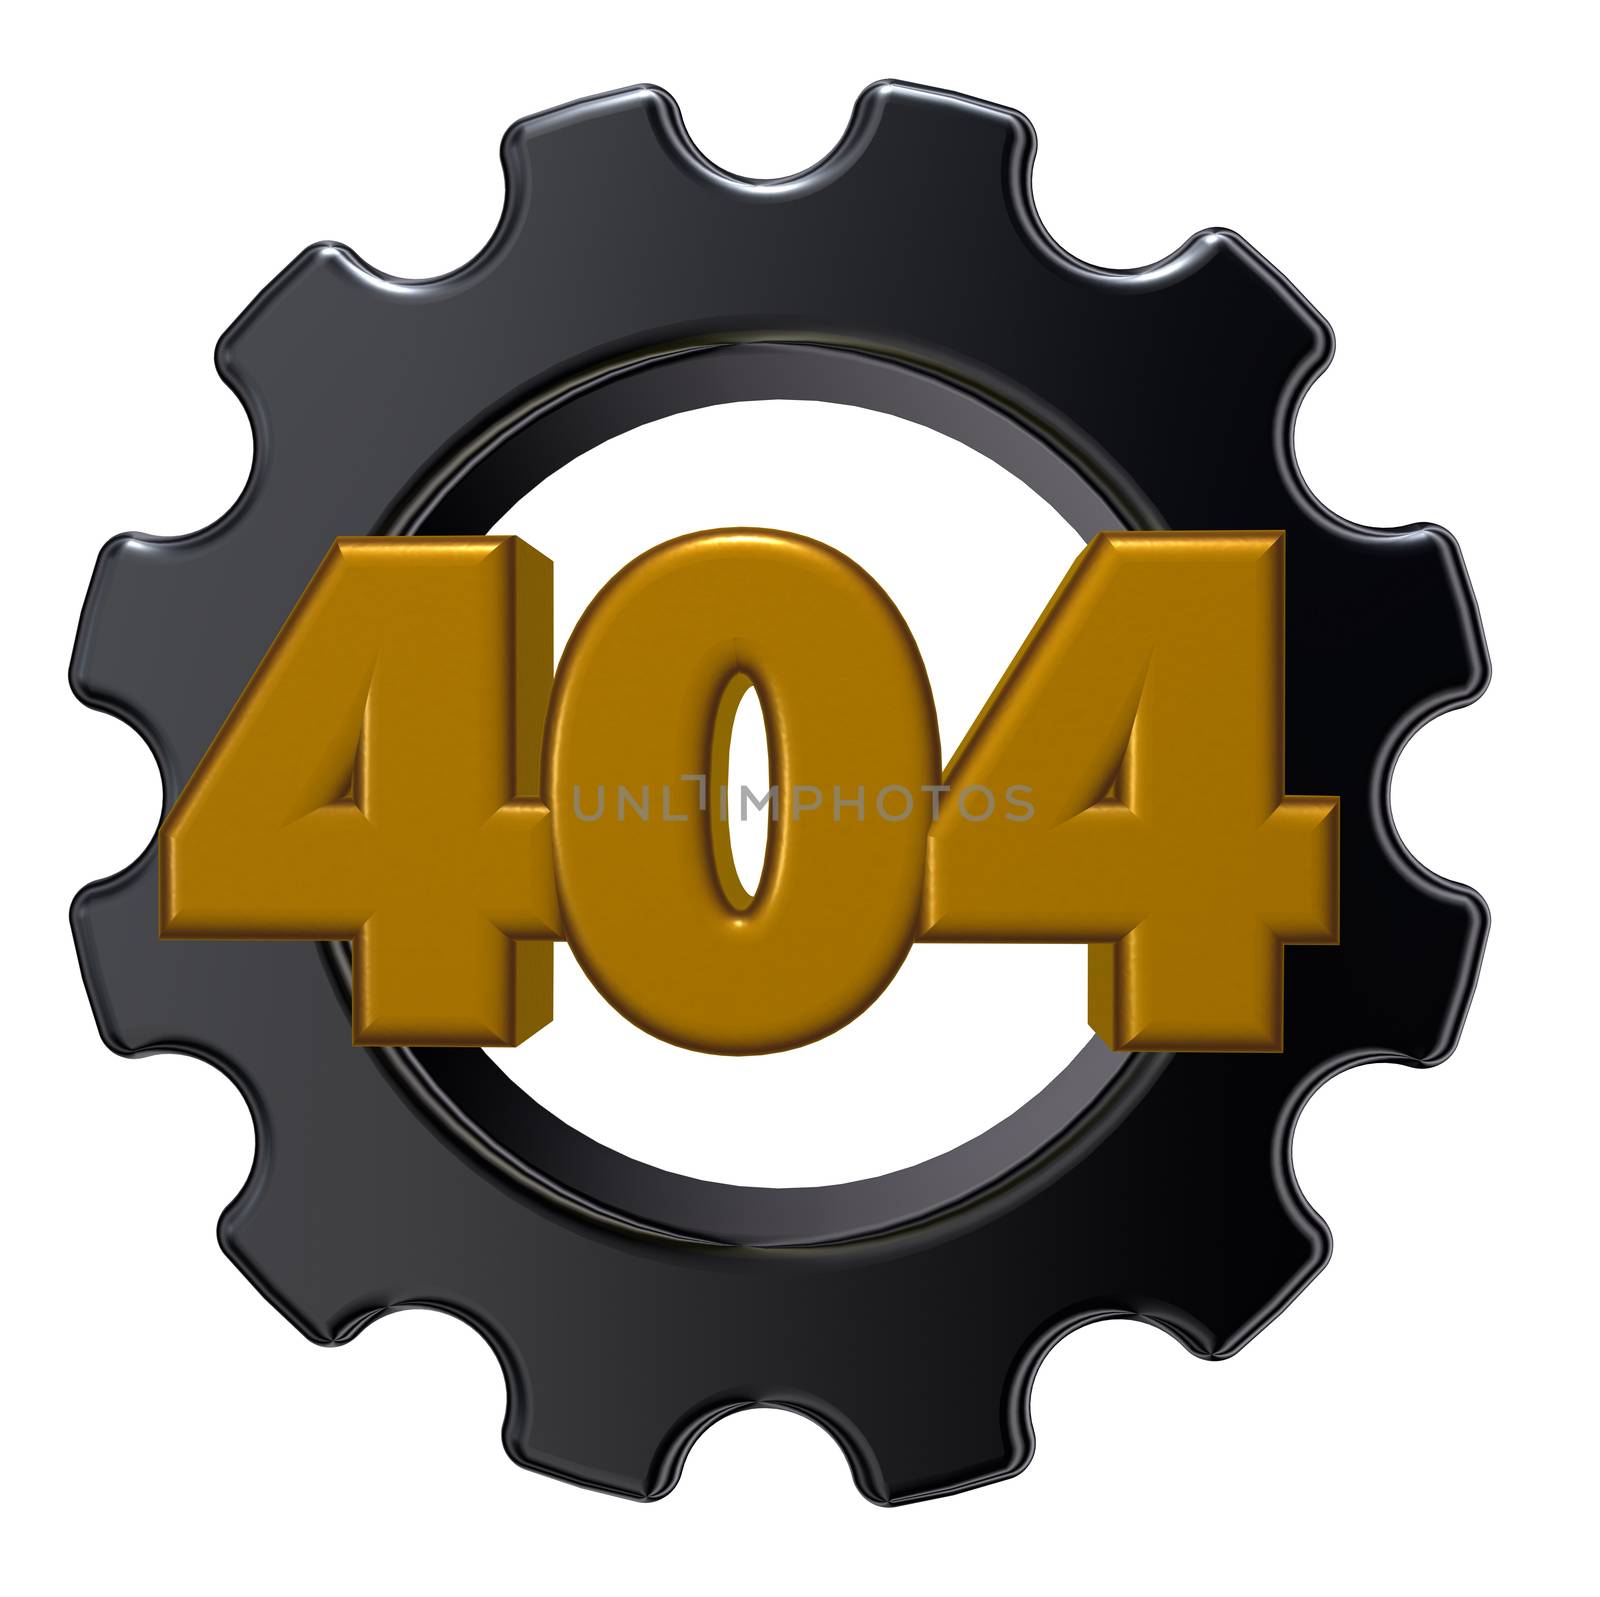 error 404 page not found - message and gear wheel - 3d illustration